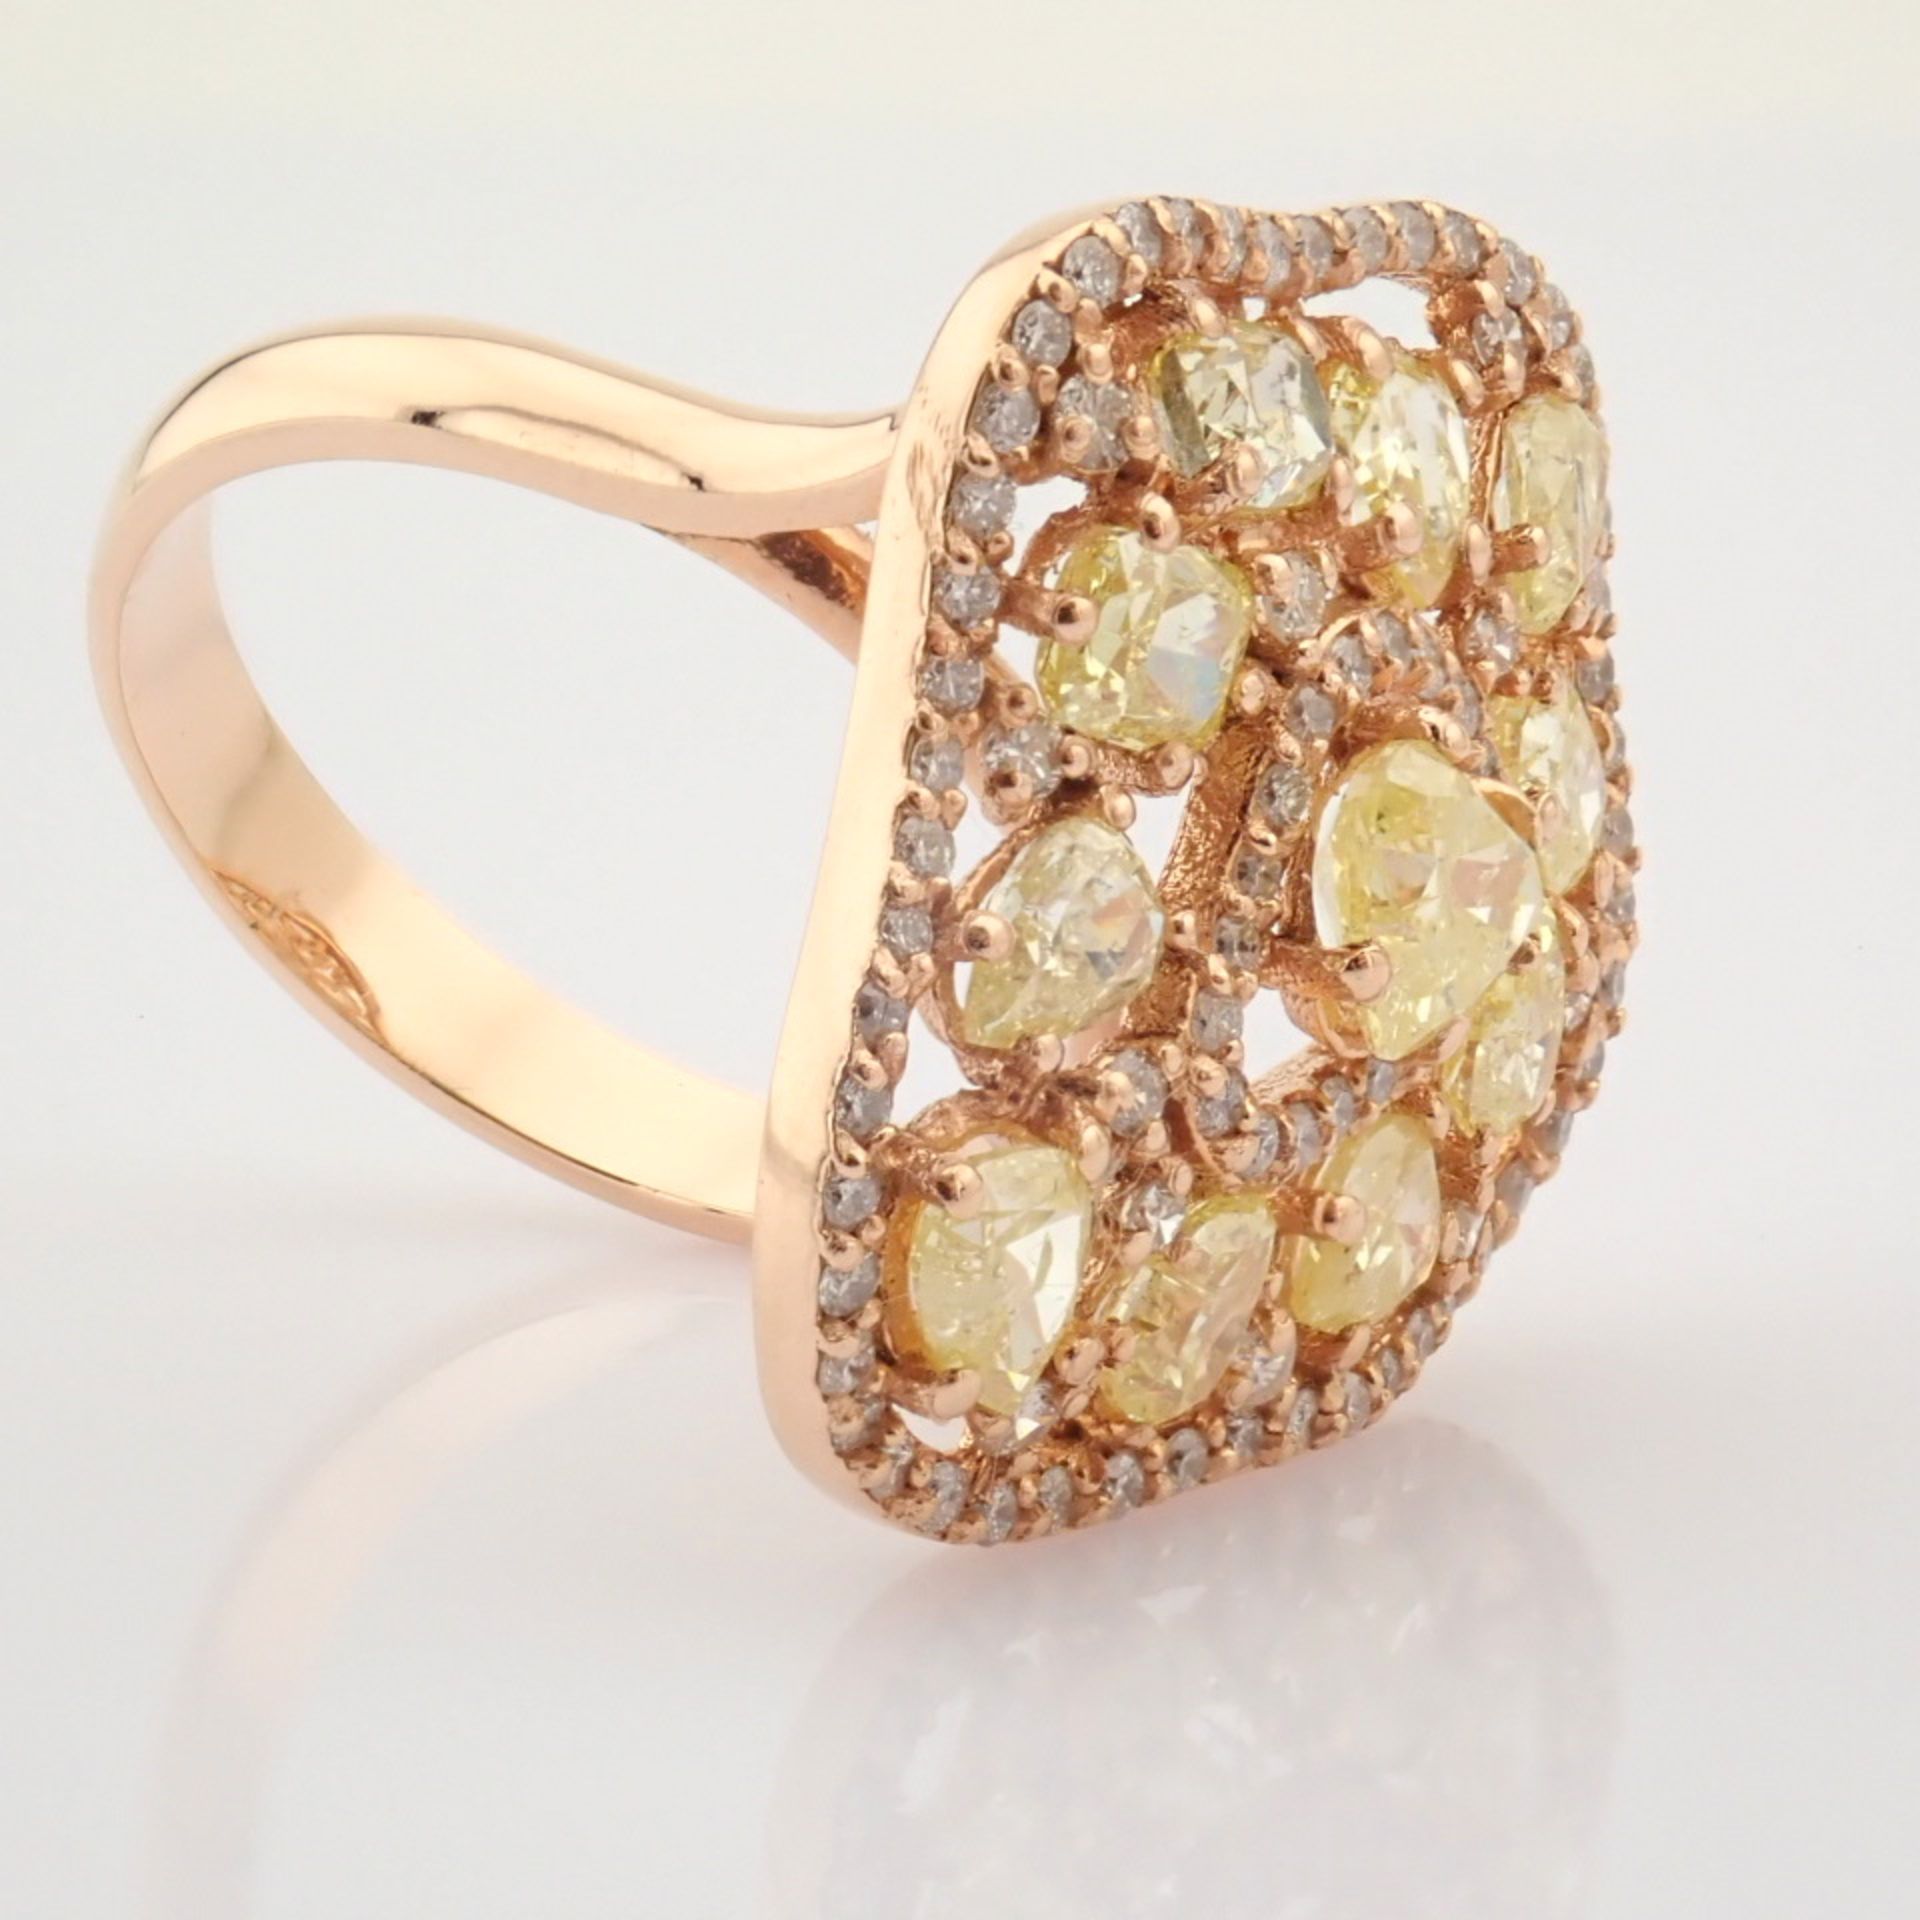 Certificated 18K Rose/Pink Gold Diamond & Fancy Diamond Ring / Total 2.96 ct - Image 5 of 7